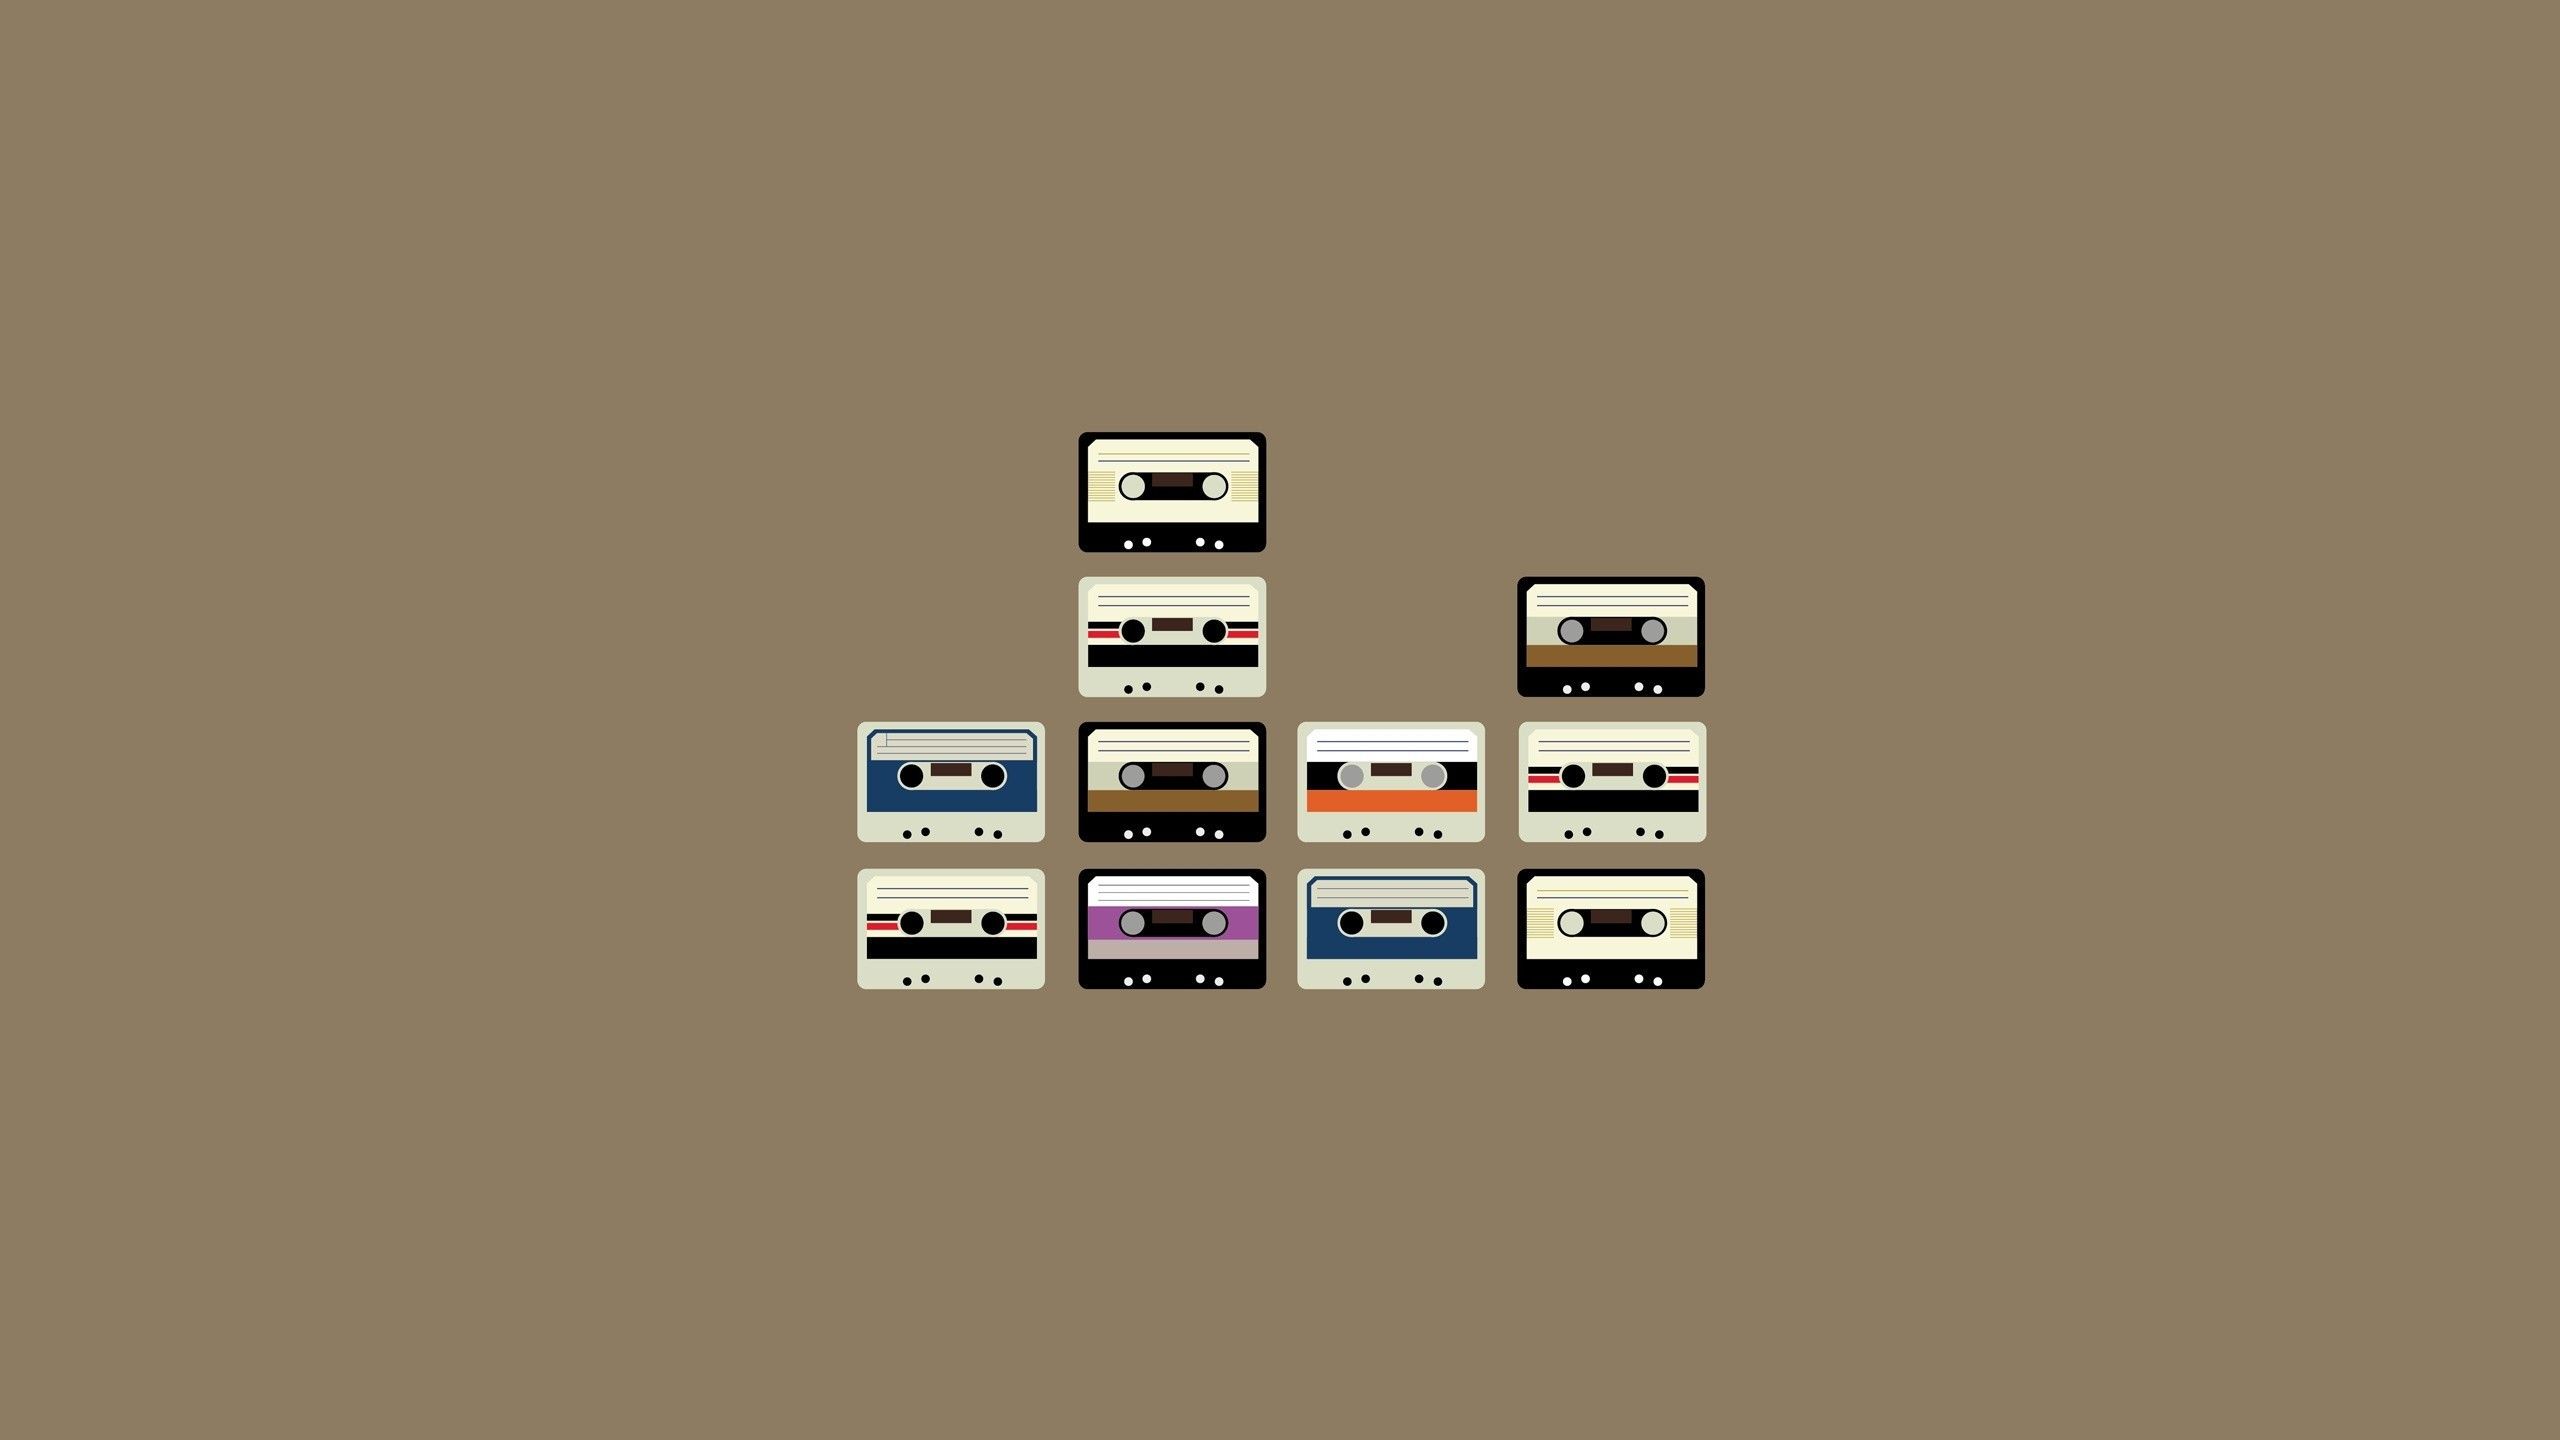 1920x1080 Cassette Tapes wallpaper, 1920x1080, Cassette Tapes, minimalism, music, free wallpaper, free background, screensaver, wallpaper, background - Minimalist